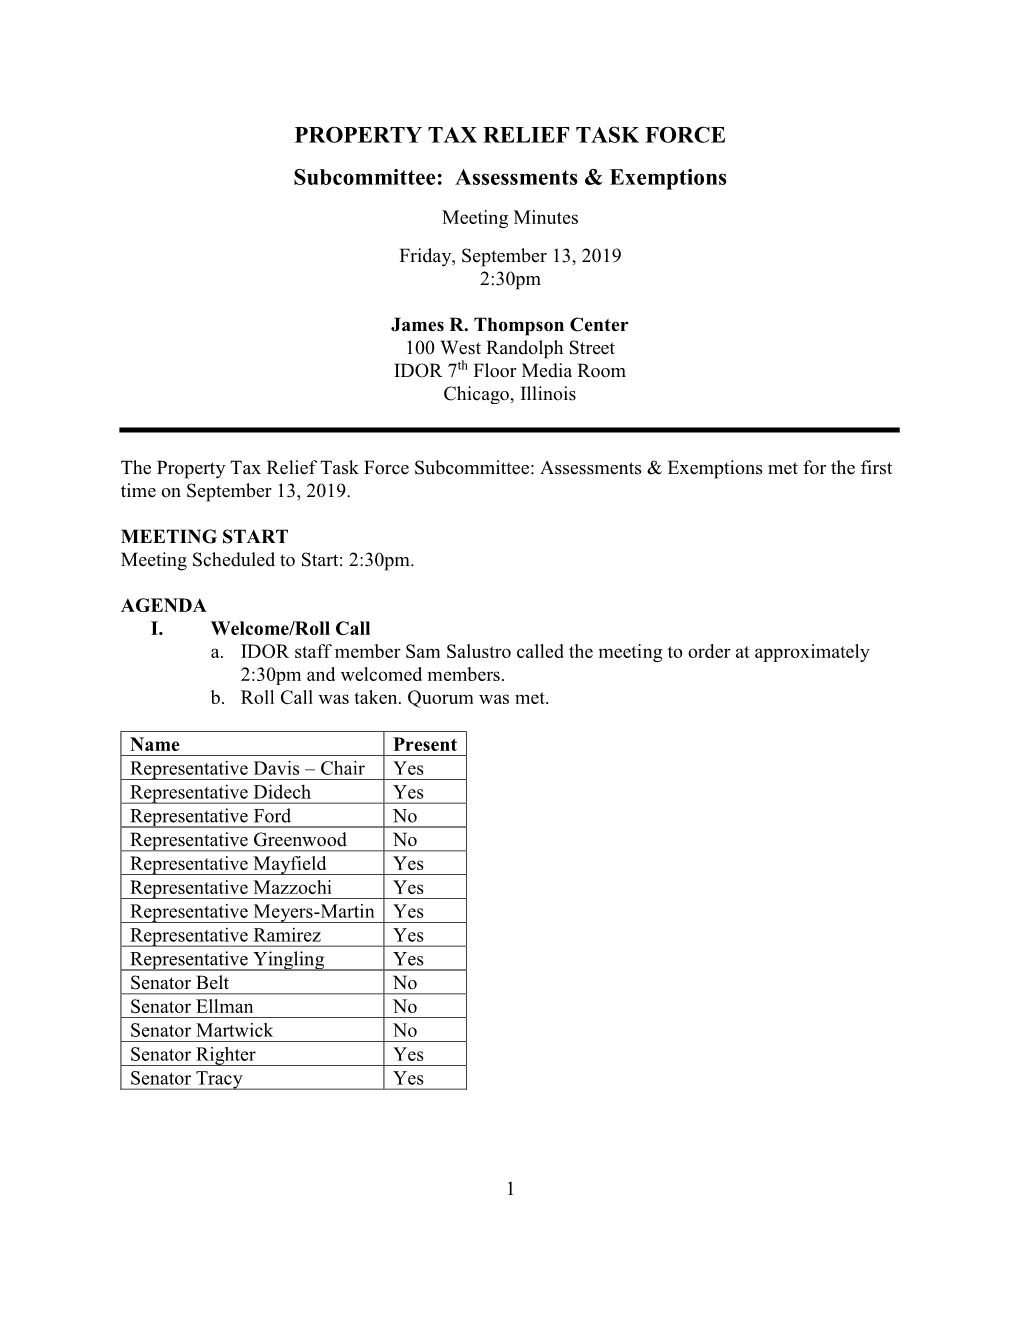 Property Tax Relief Task Force Subcommittee: Assessments and Exemptions